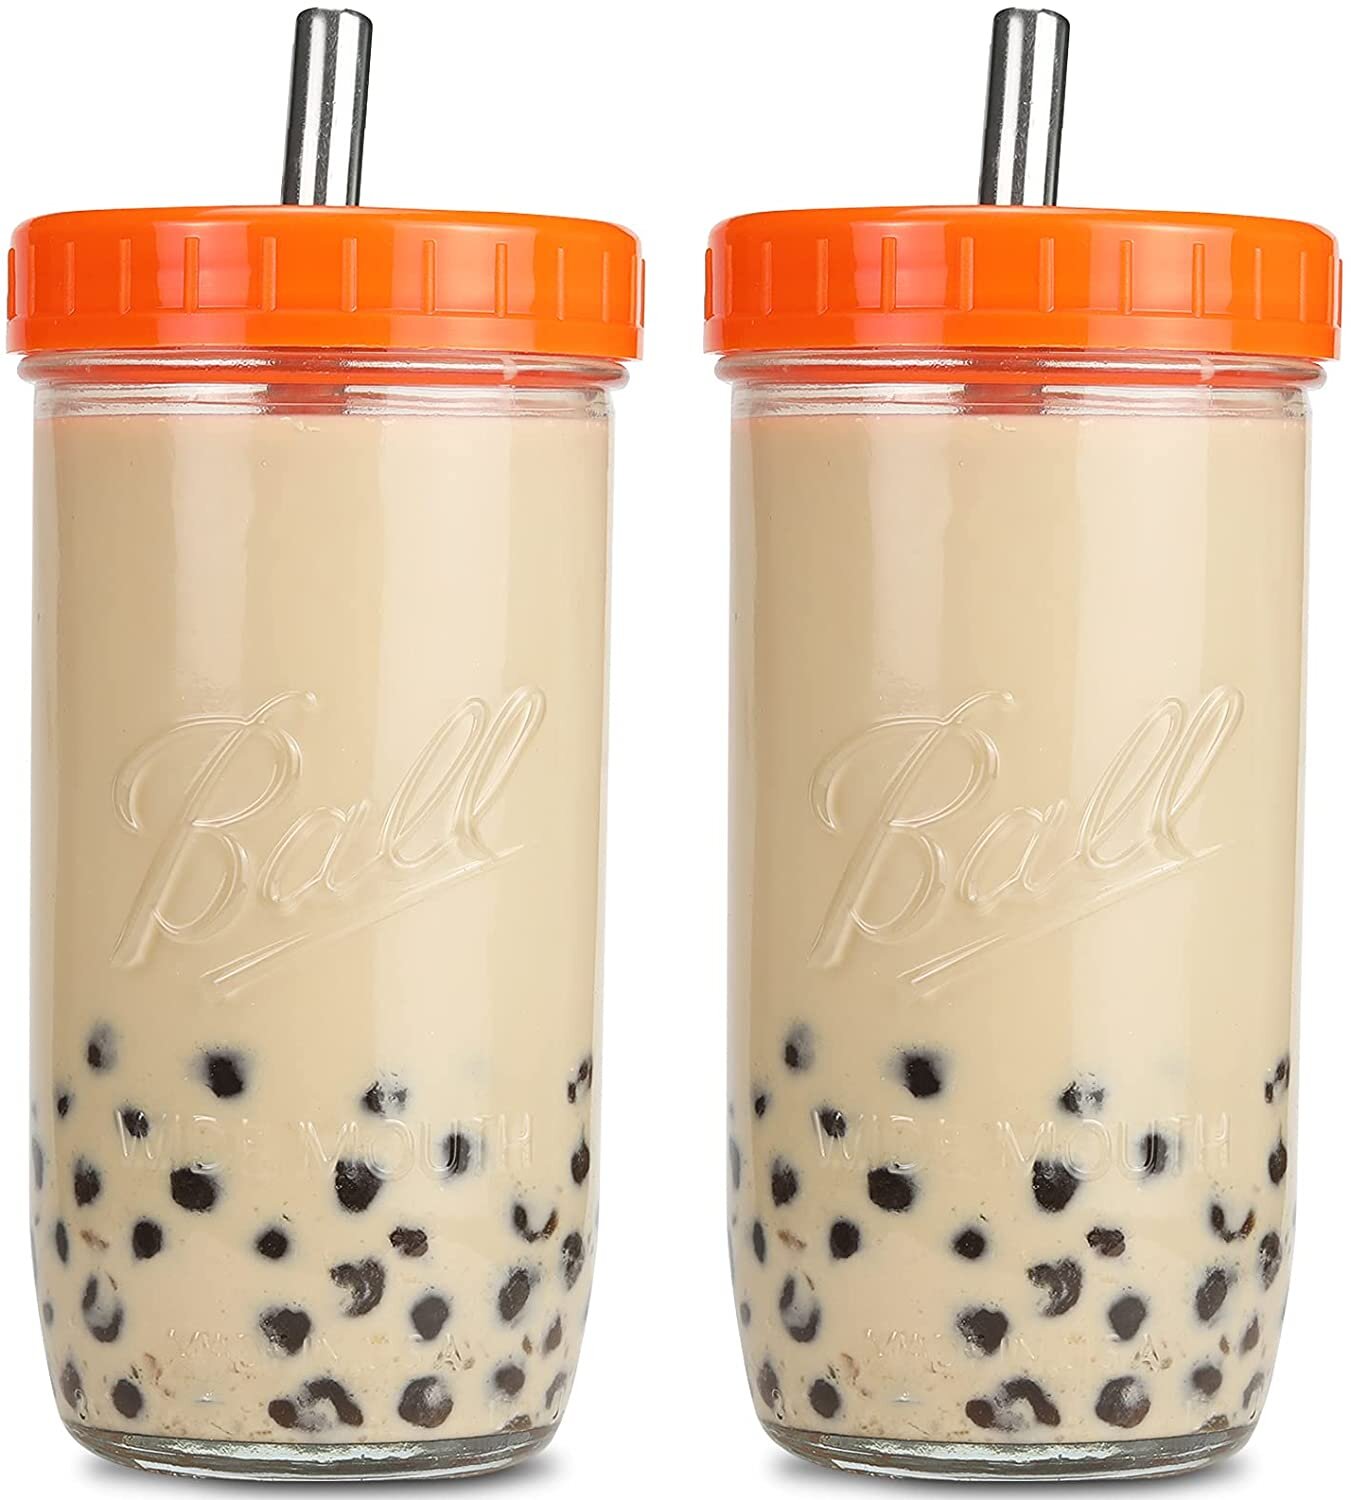 2-Pack, 24 oz Mason Jars Droutti Reusable Wide Mouth Smoothie Cups Boba Tea Cups Bubble Tea Cups with Lids Mason Jars Glass Cups with Gold Straws and Brush